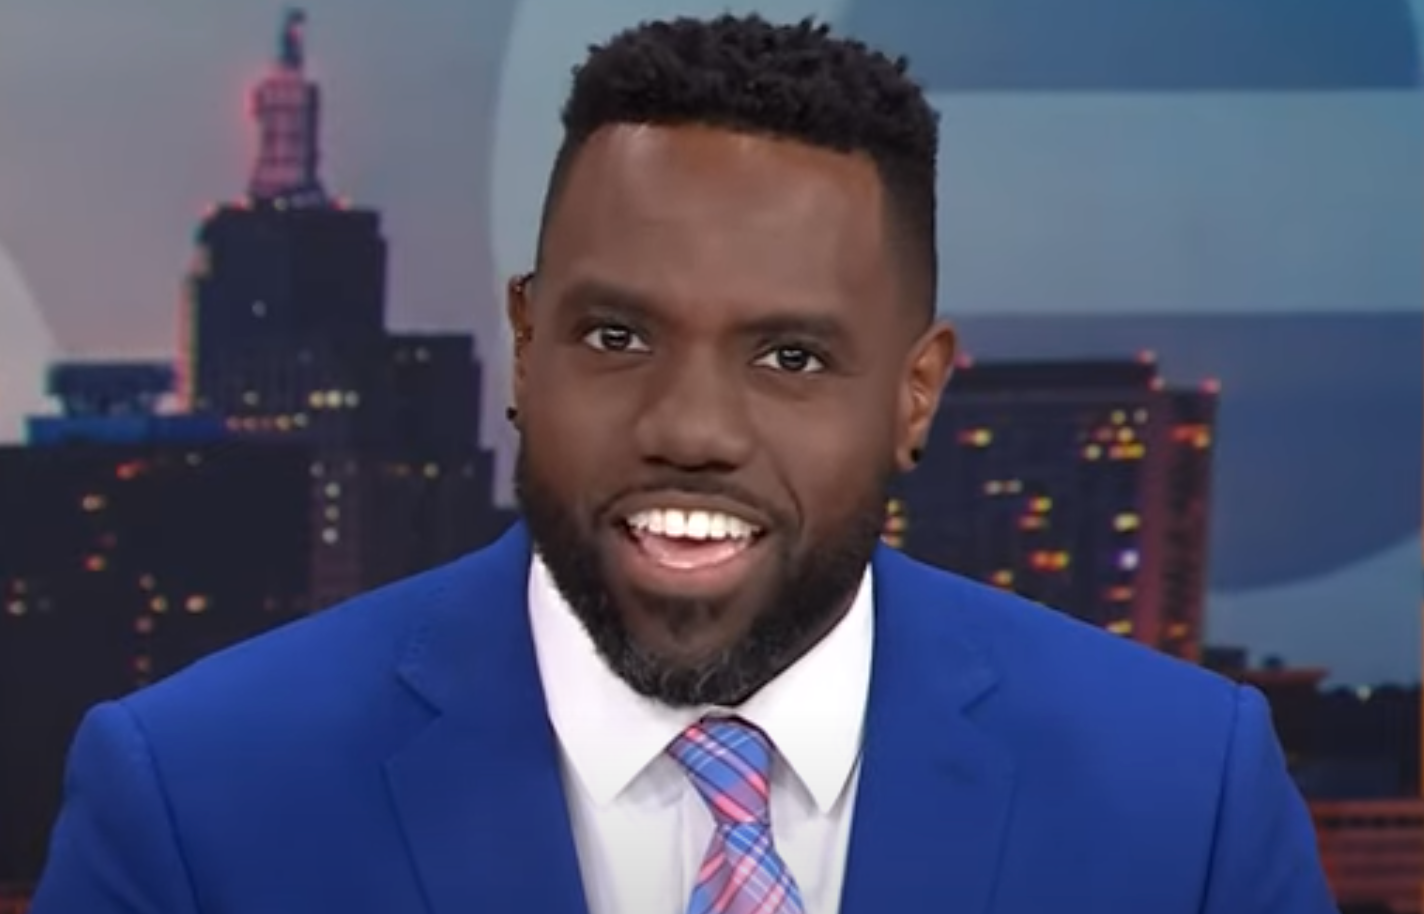 This amazing news anchor surprised his colleagues by coming out on air